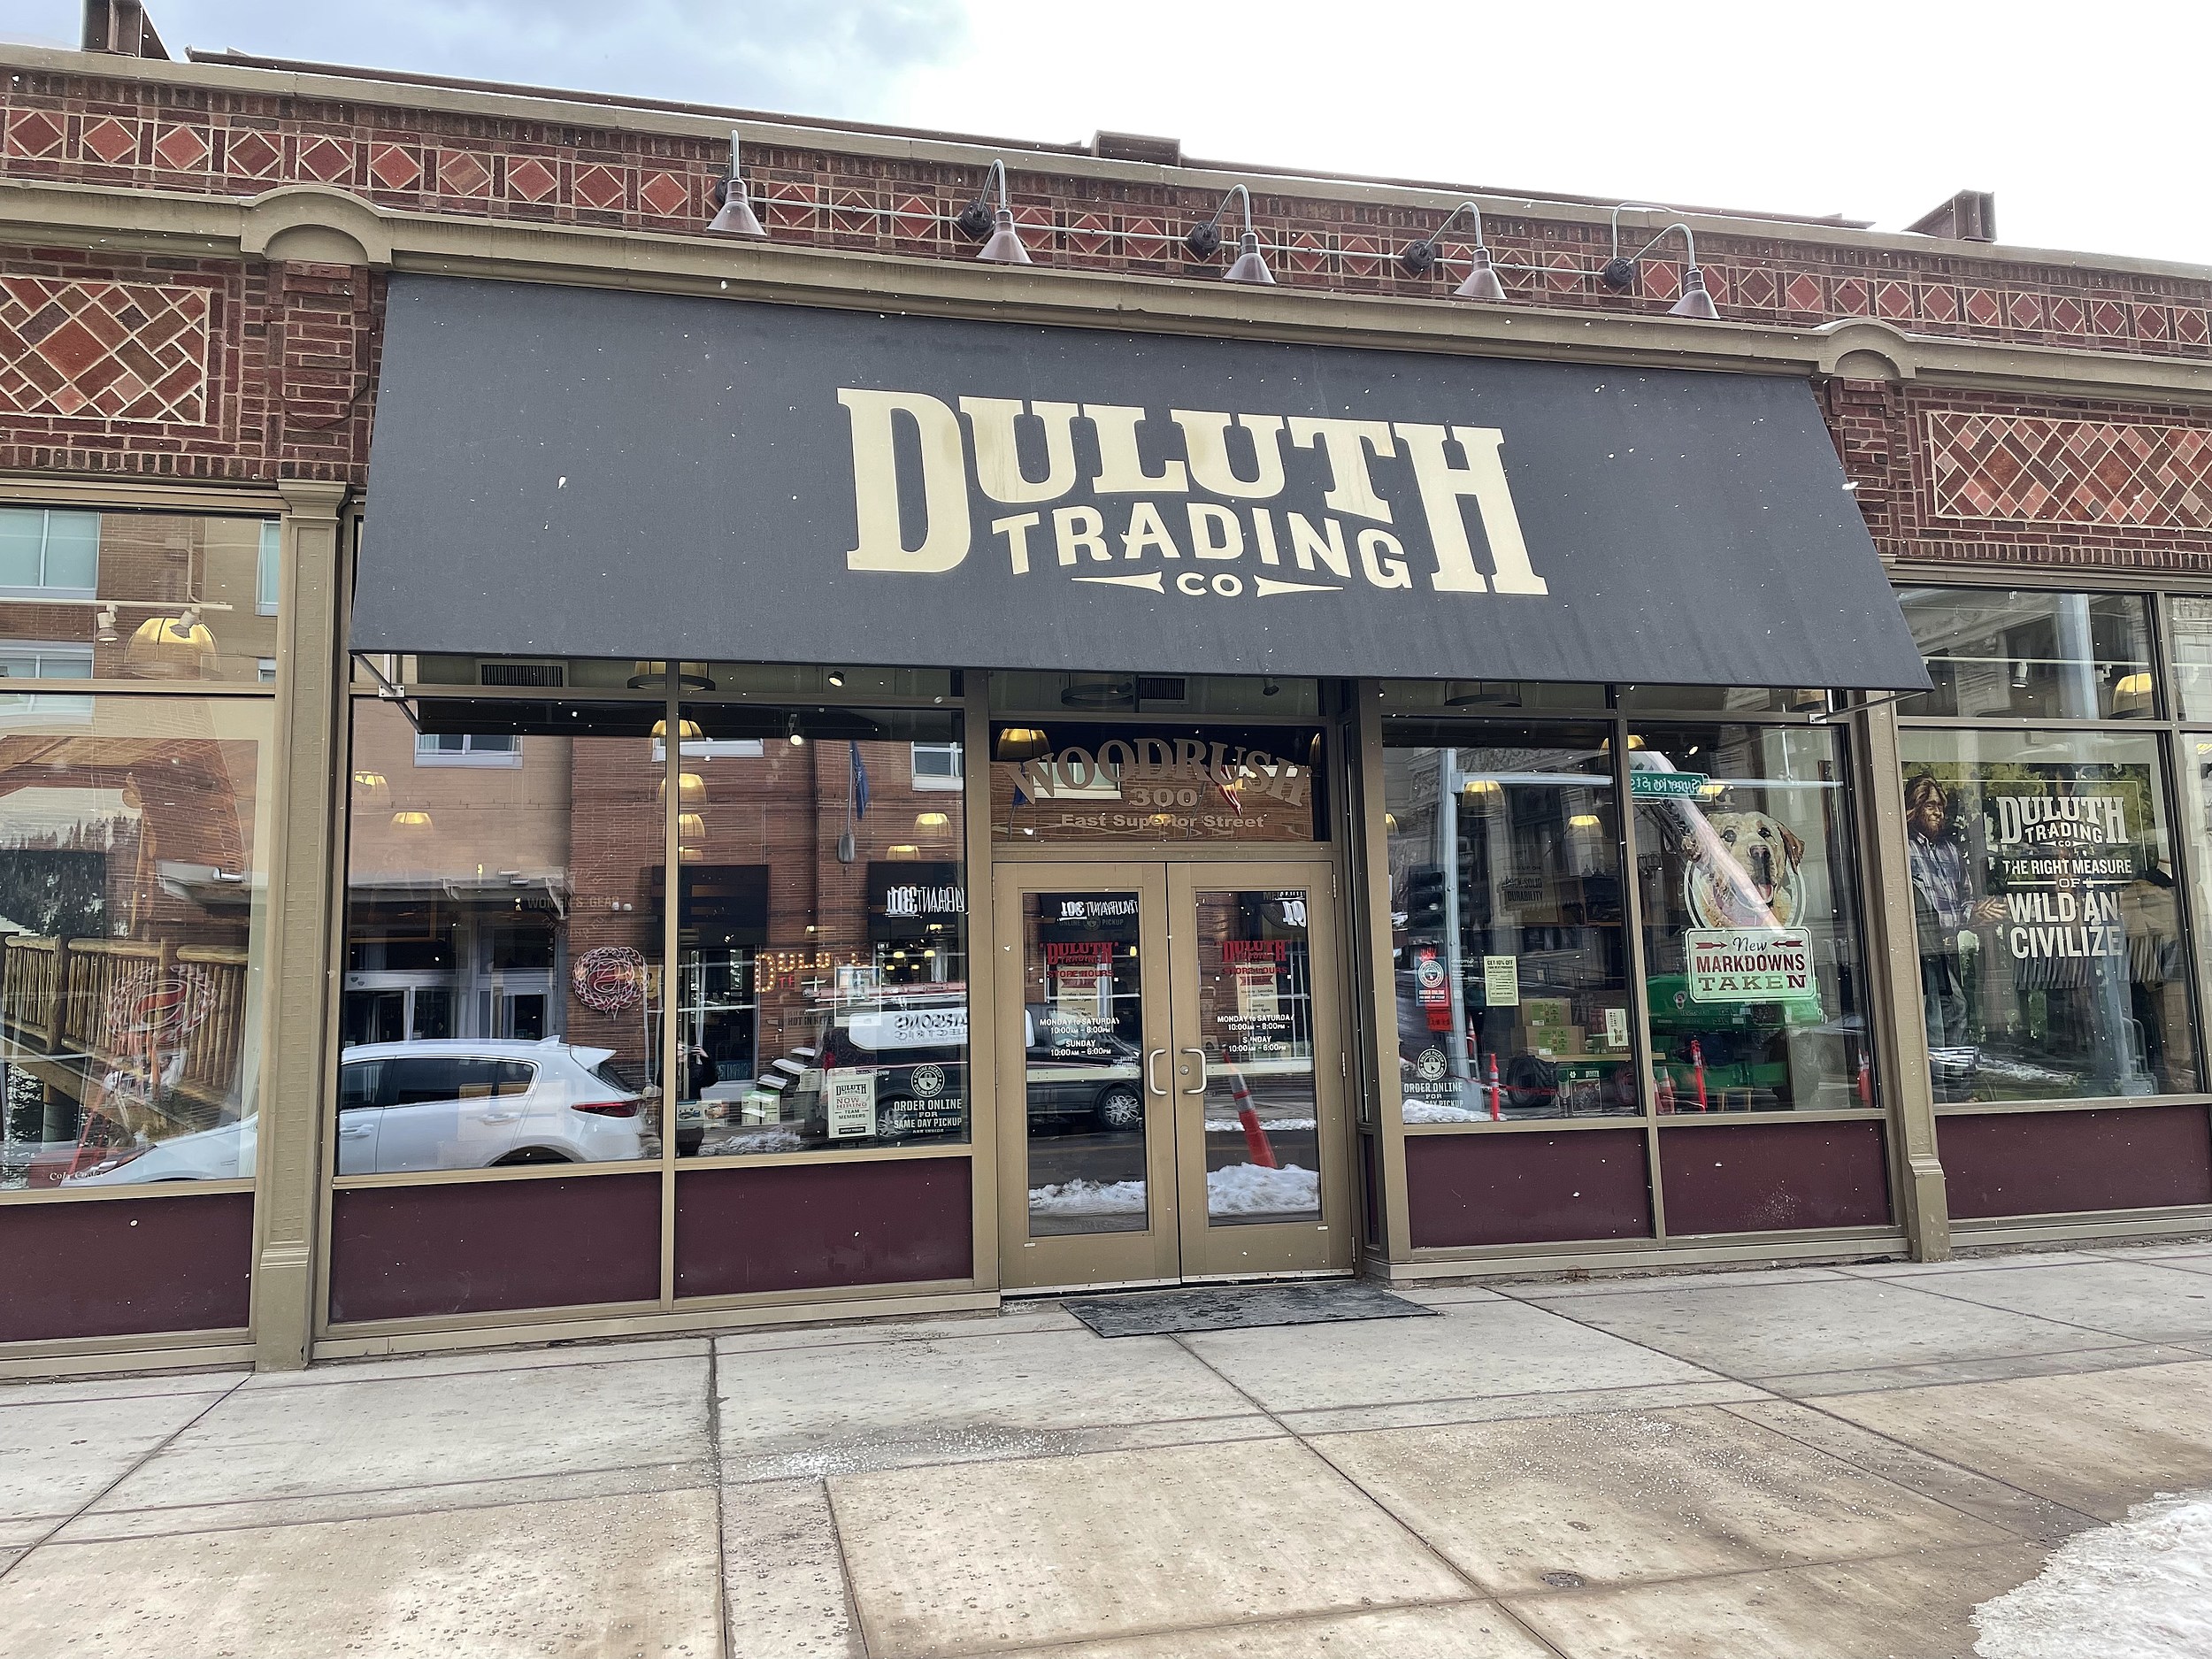 Duluth Trading Co. on X  Duluth, Duluth trading, Duluth trading